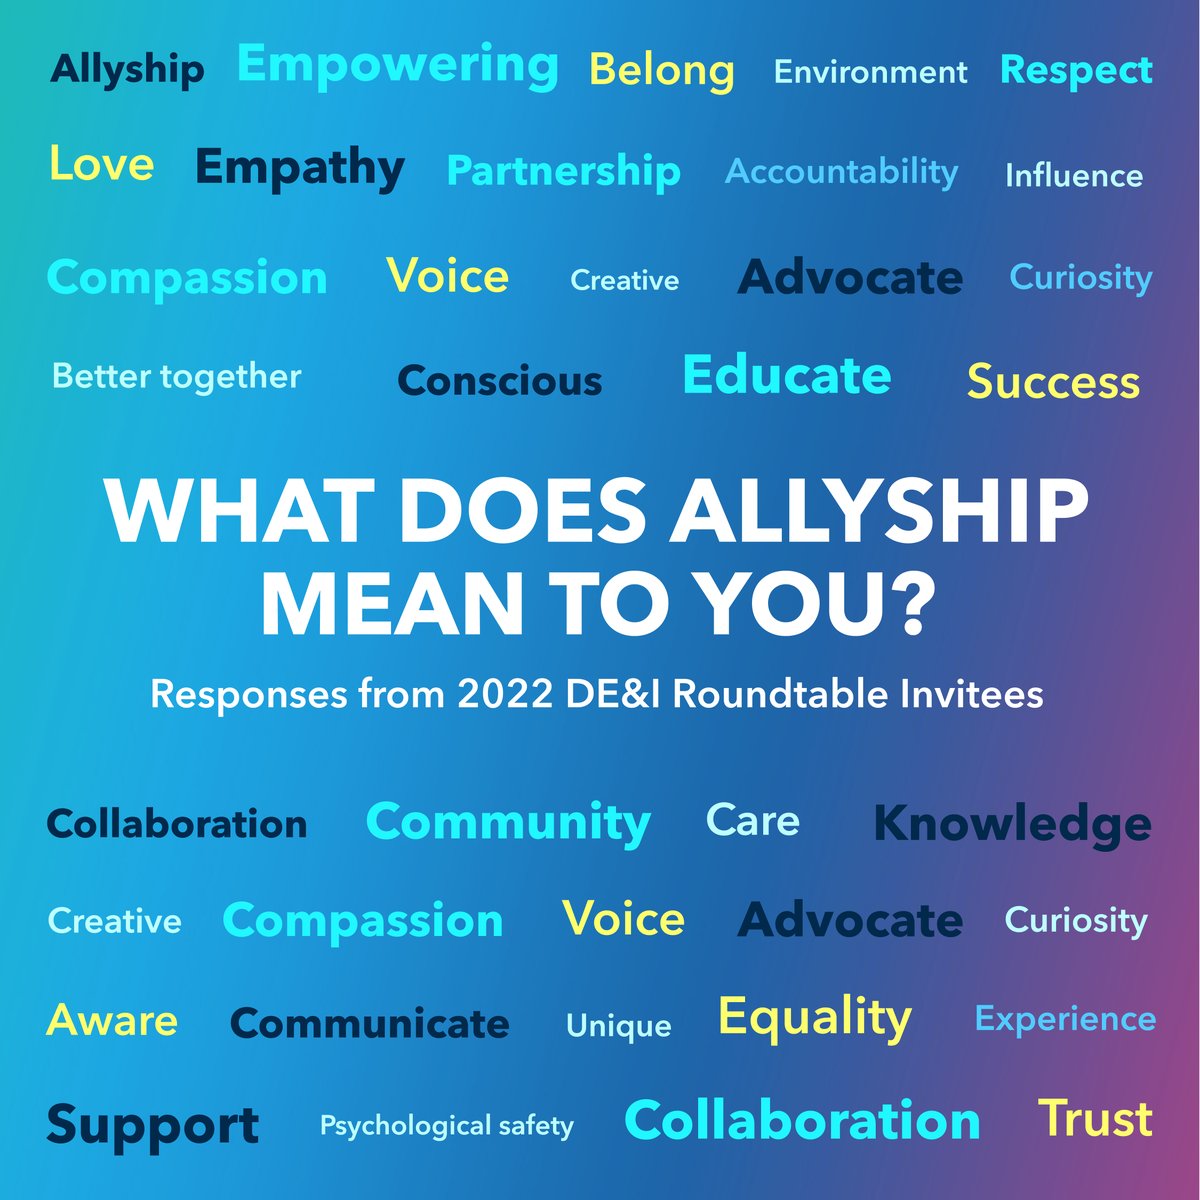 Our industry has made a clear commitment to allyship. At our 5th Annual DE&I Roundtable we will address in detail how “Allyship in Action” helps create better results for everyone. #OurDifferencesMakeUsBetter